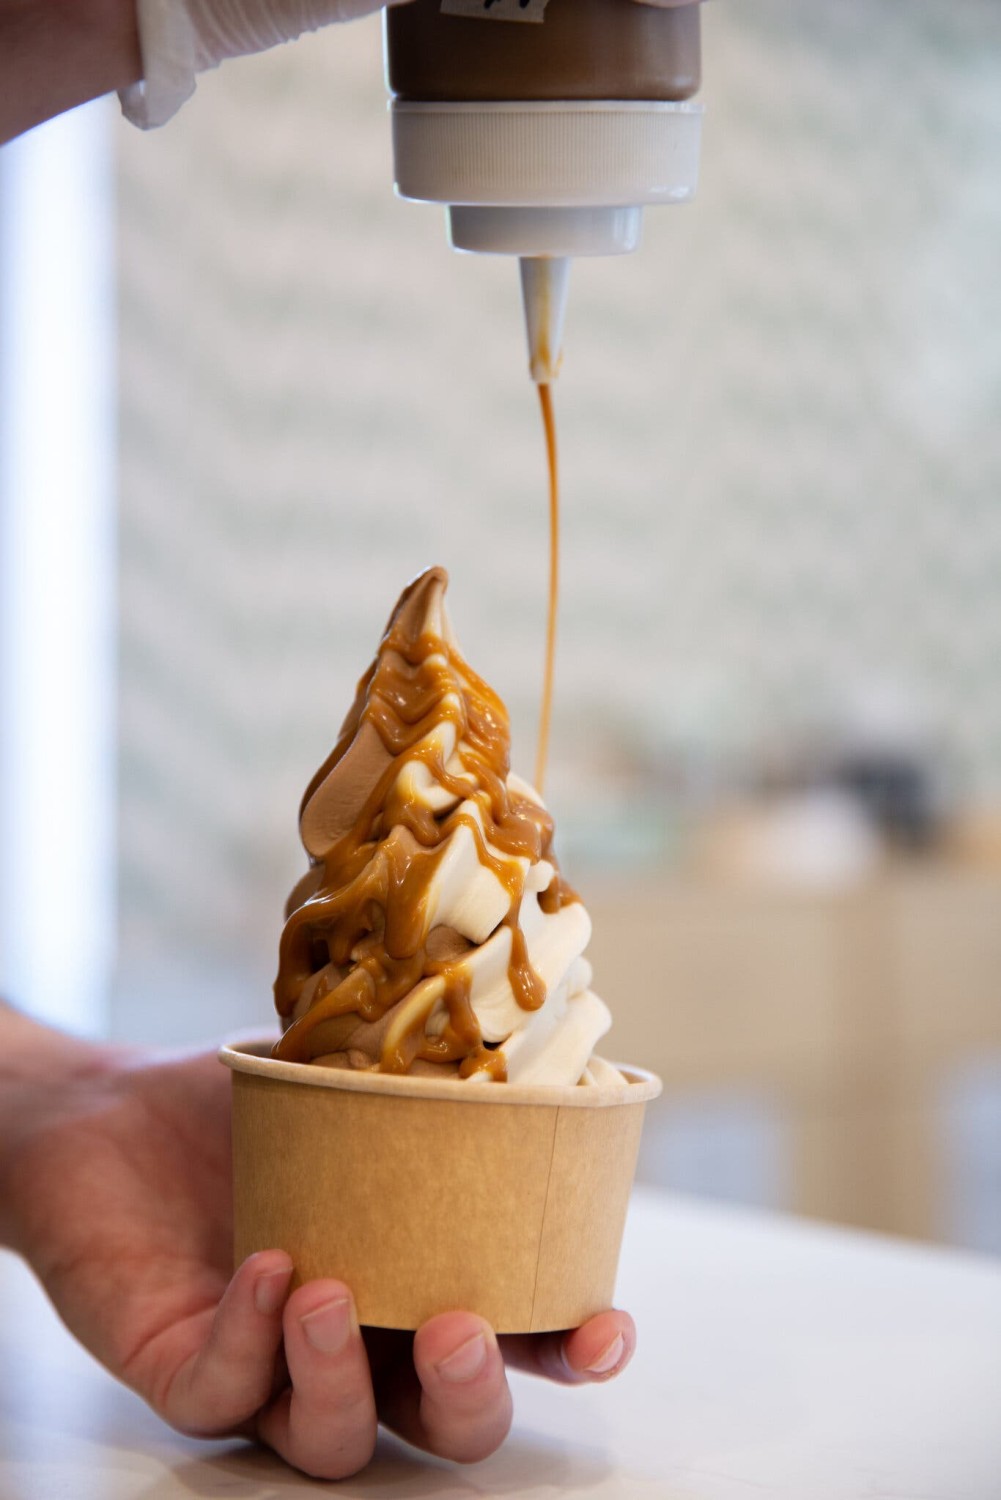 Plant-based ice cream shops are popping up across the country. Here’s the chocolate and vanilla soft serve with miso caramel at Vaca’s Creamery, in Chicago. Credit...Anjali Pinto for The New York Times